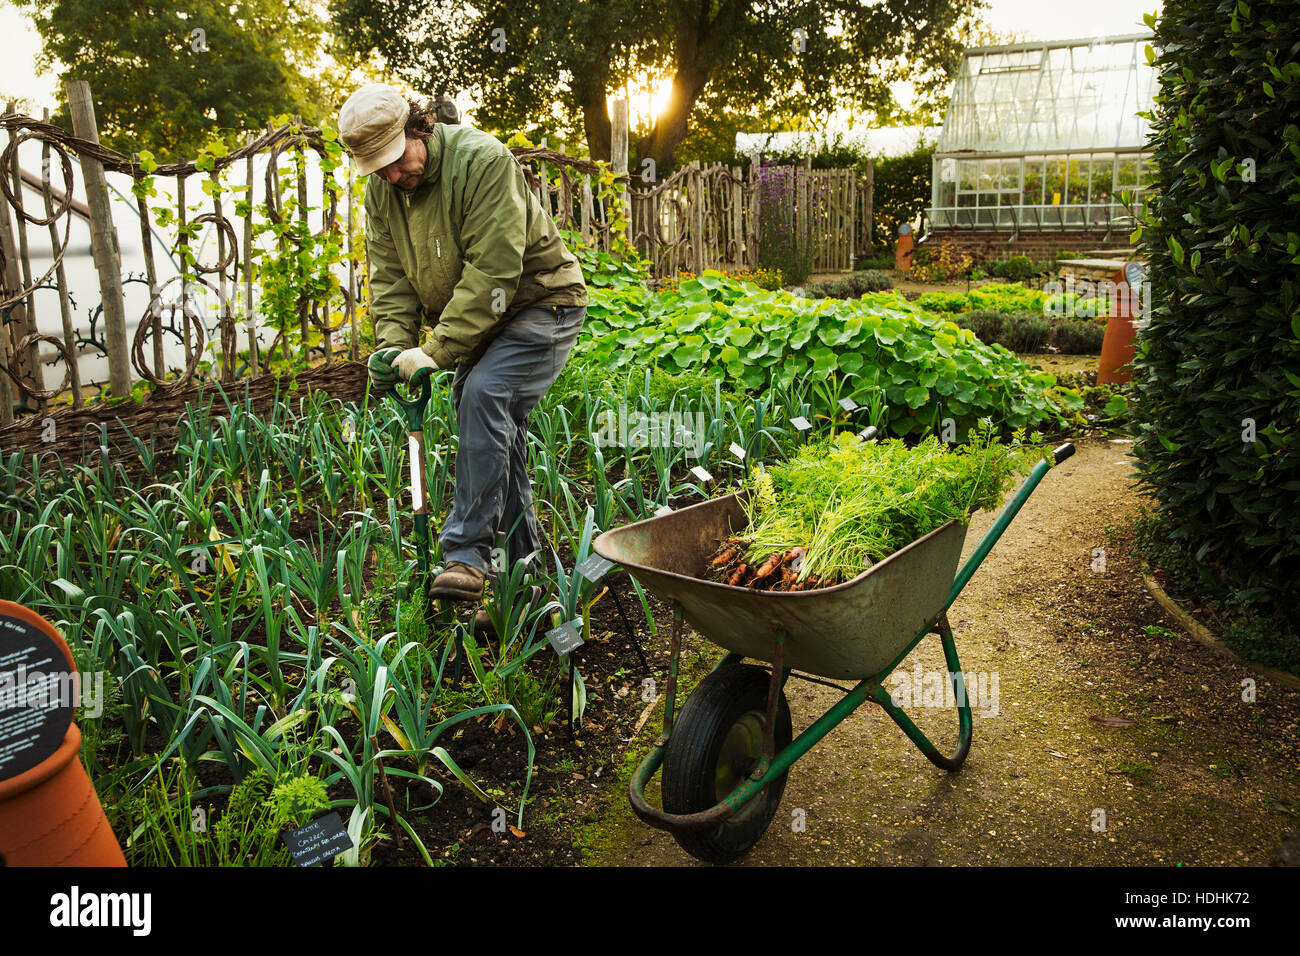 A person digging with a spade in a vegetable garden. Stock Photo